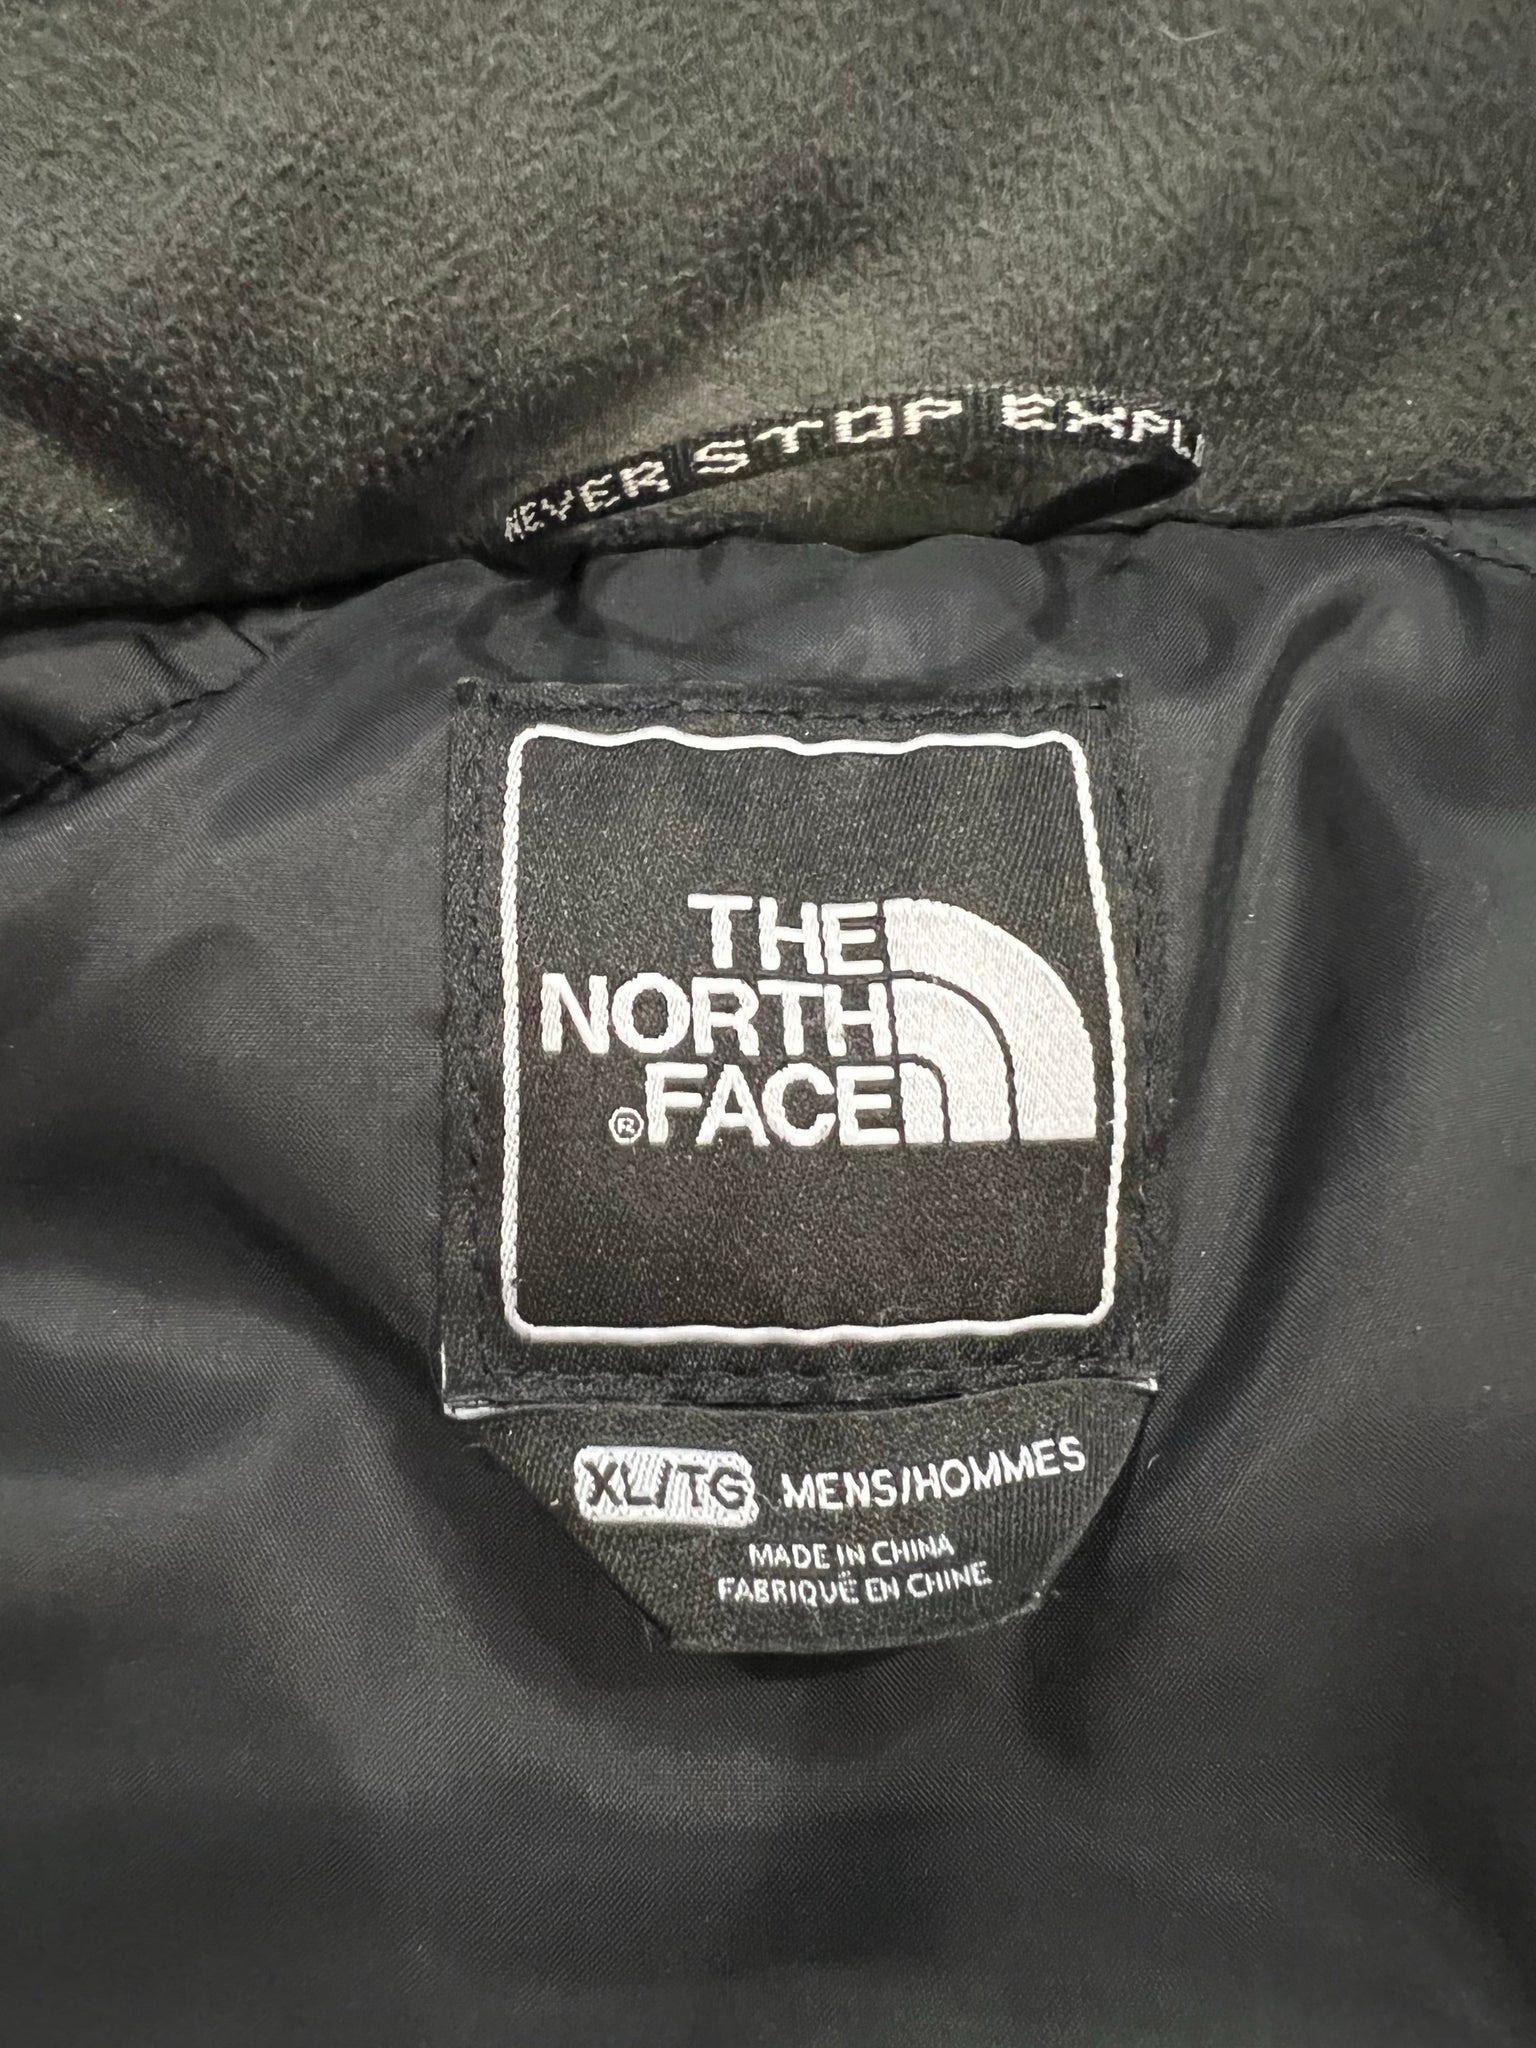 2010 North Face Hyvent down hooded jacket fits XL/XXL